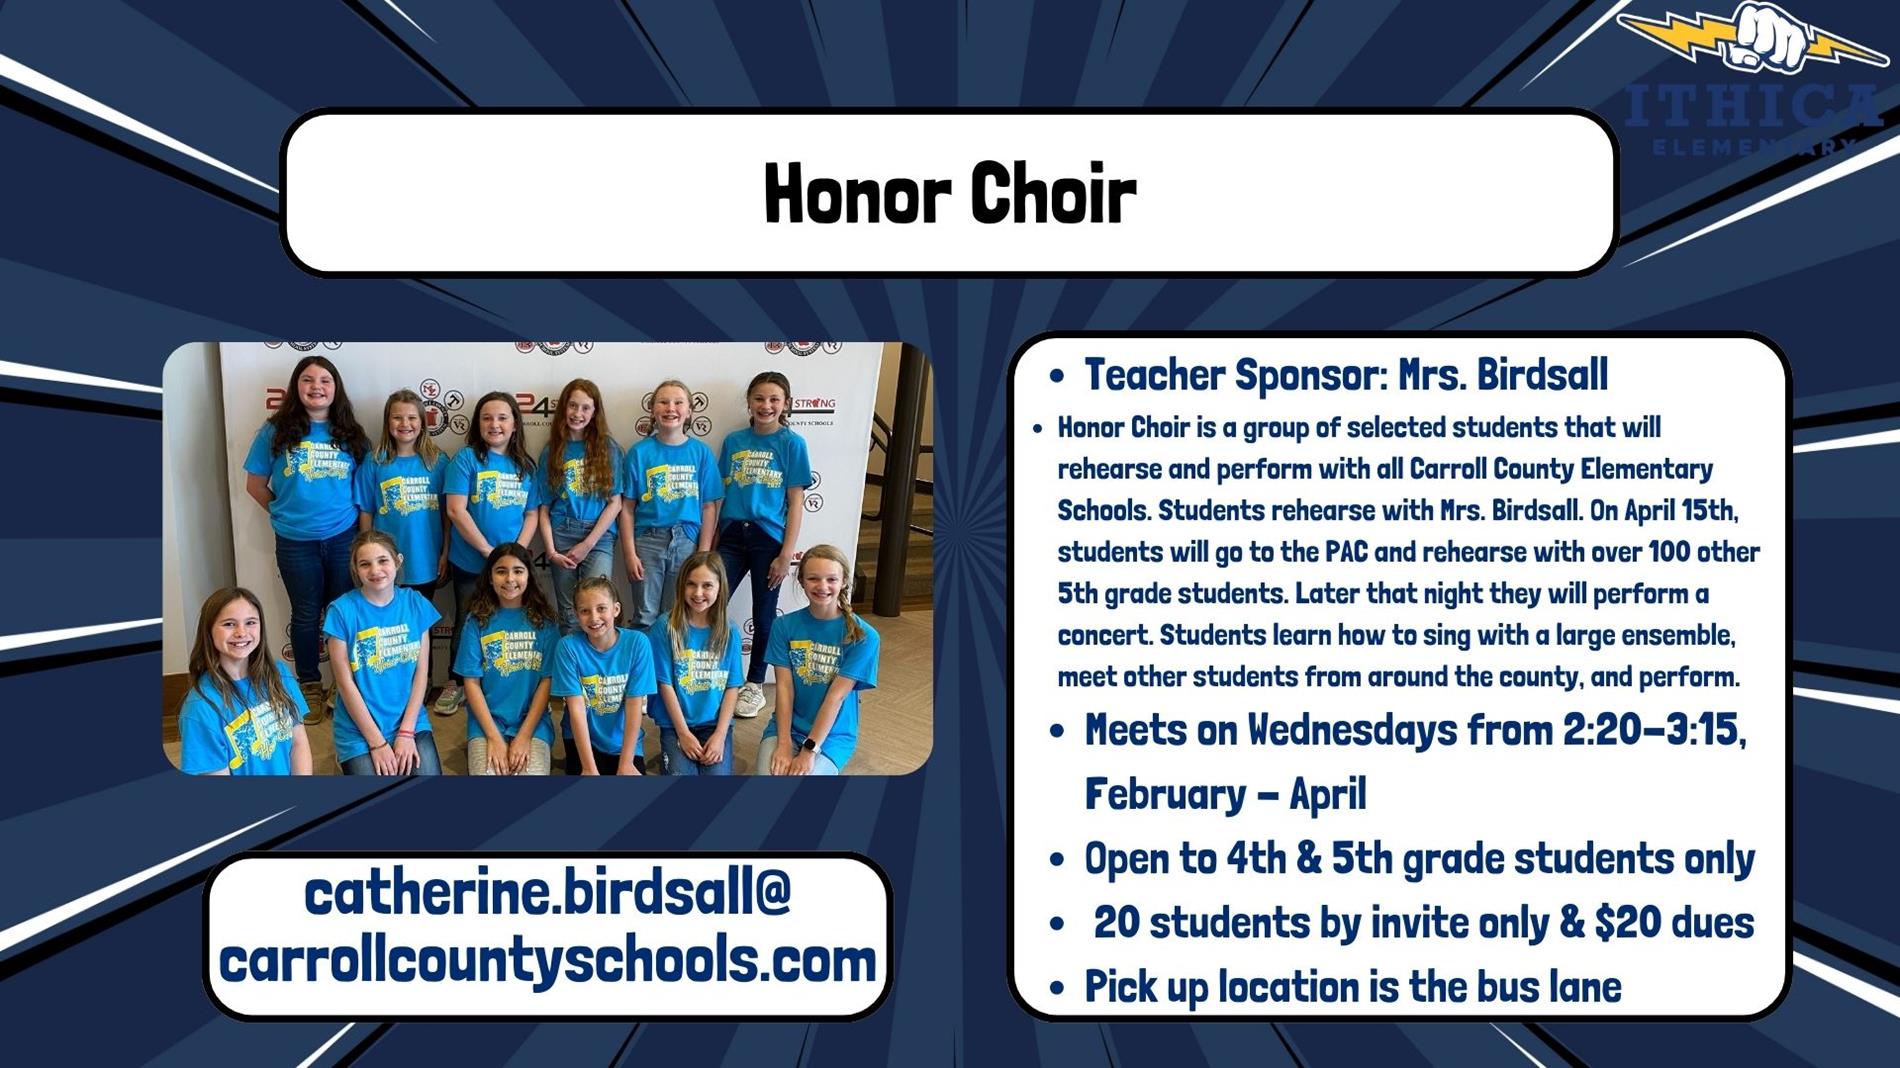 information about honor choir